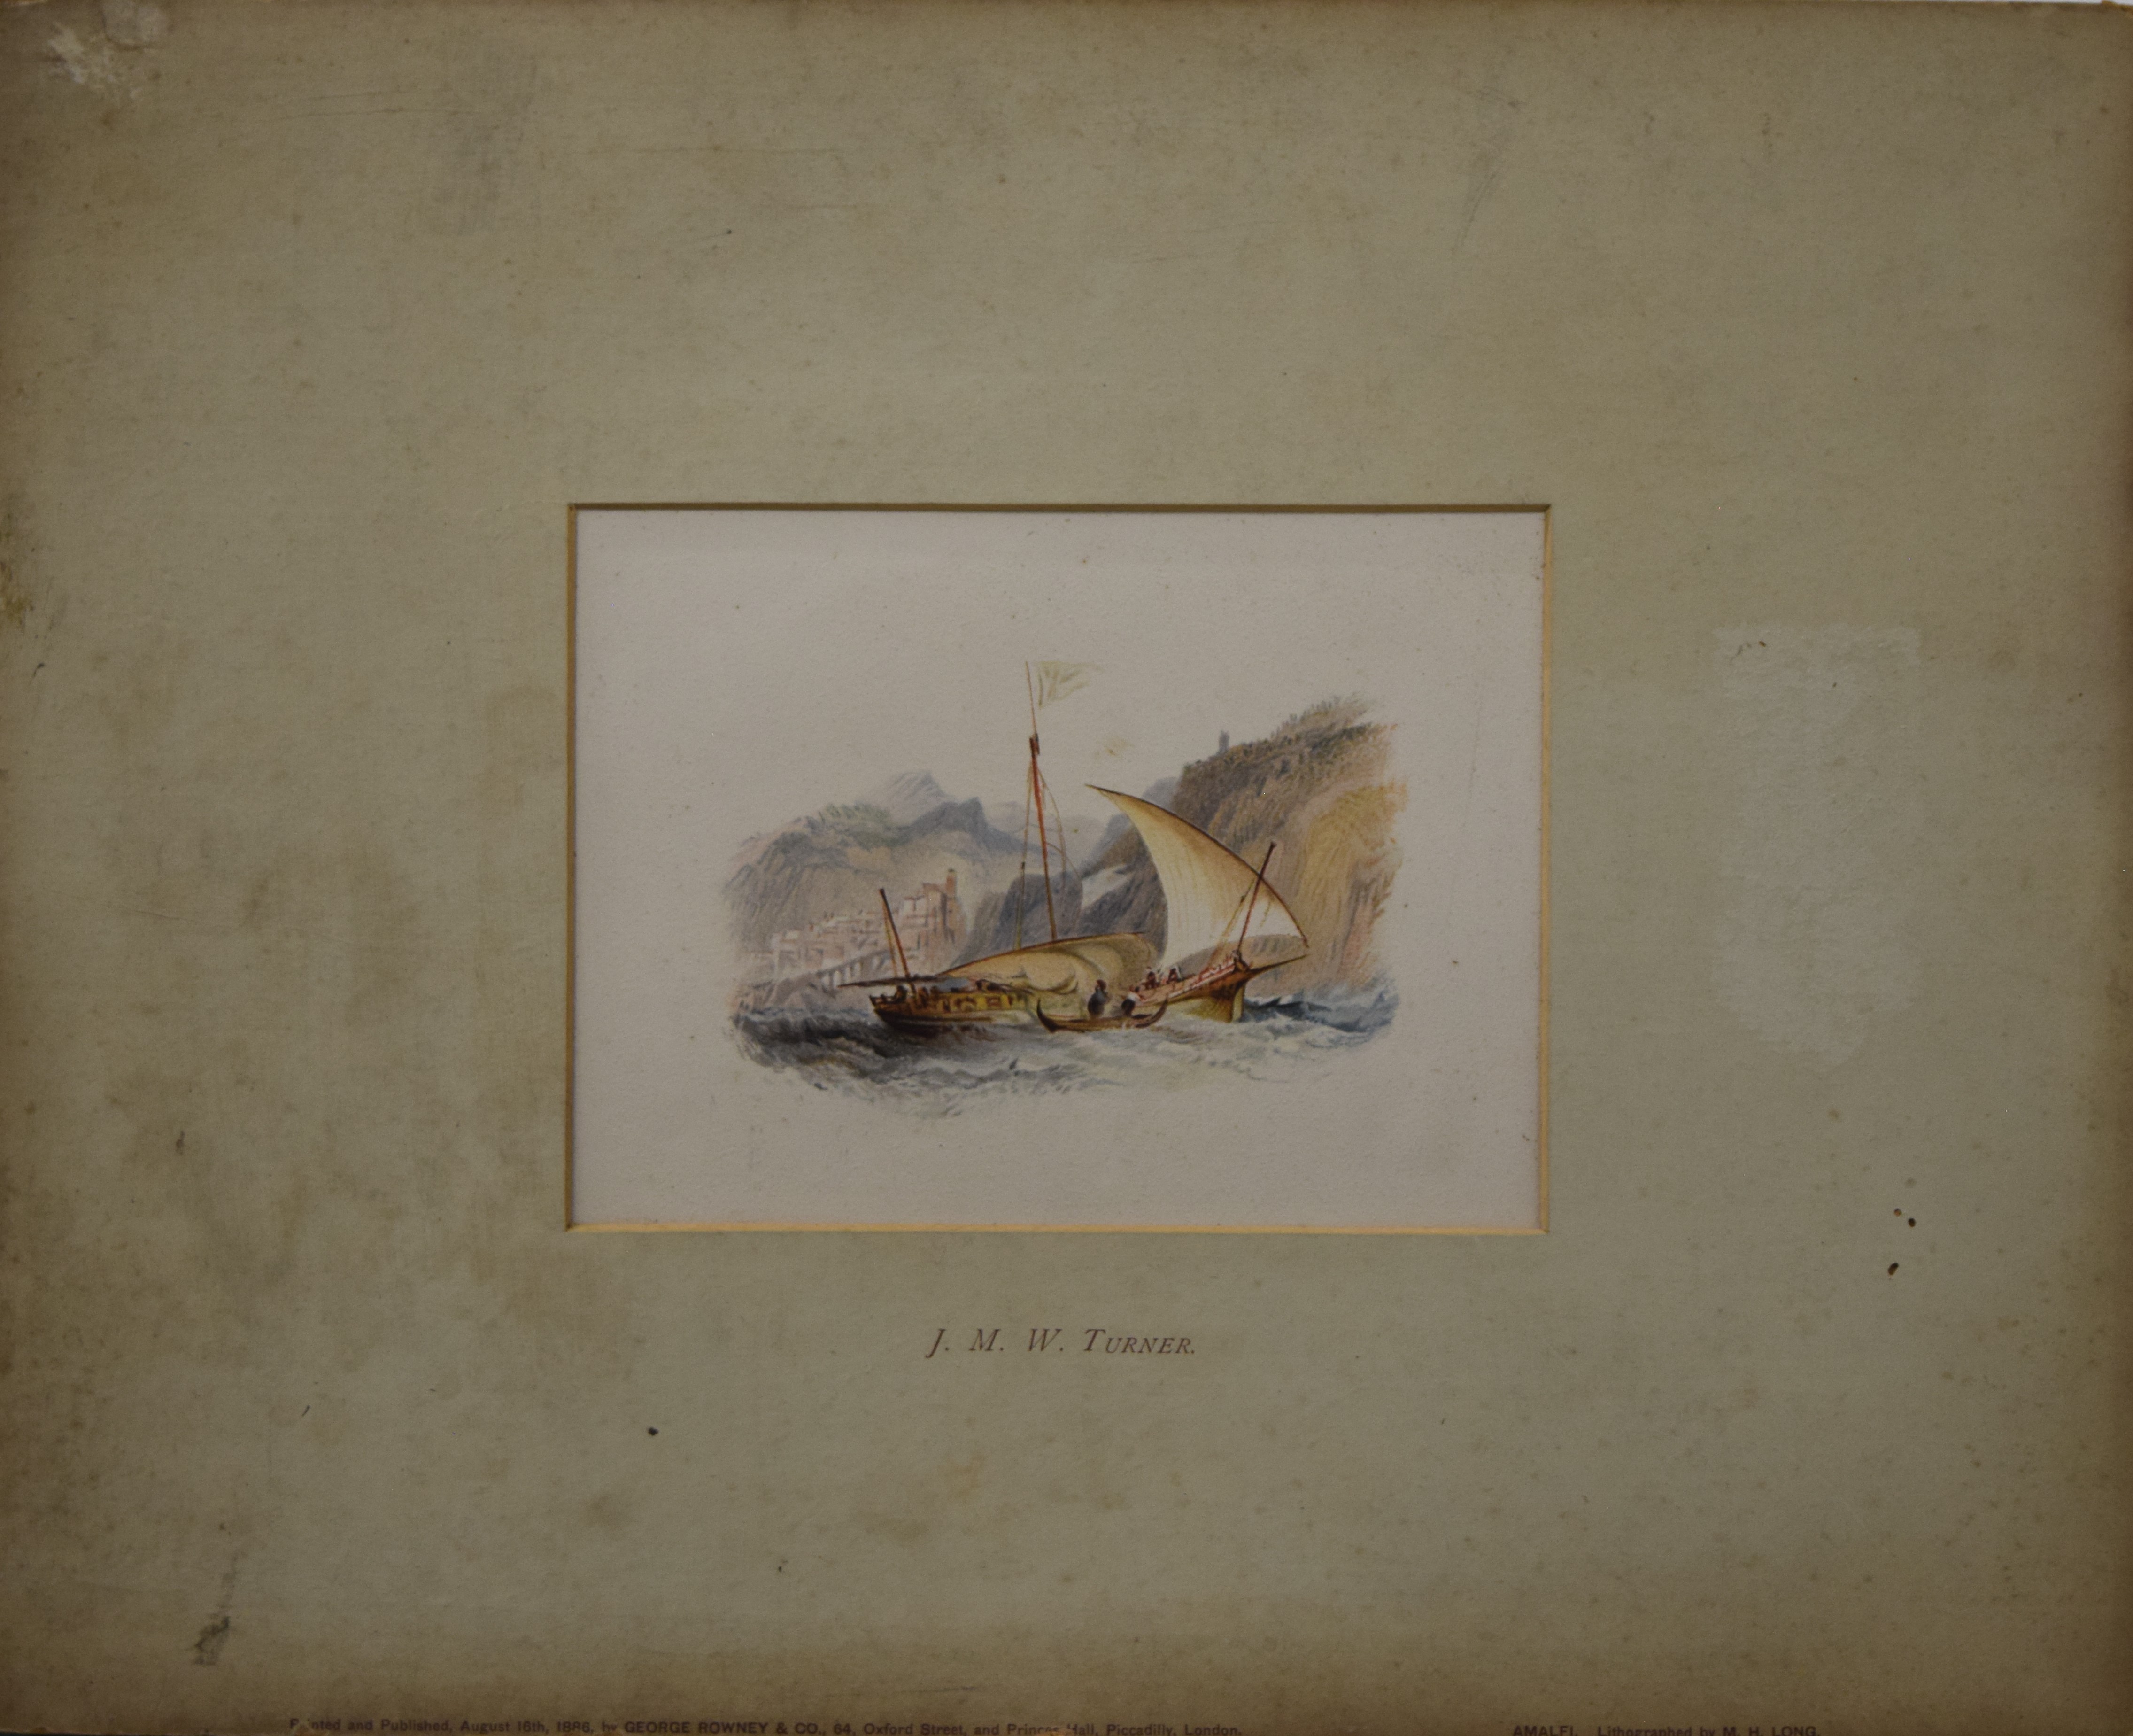 Four coloured prints After J M W TURNER, printed and published by George Rowney and Co, - Image 6 of 8